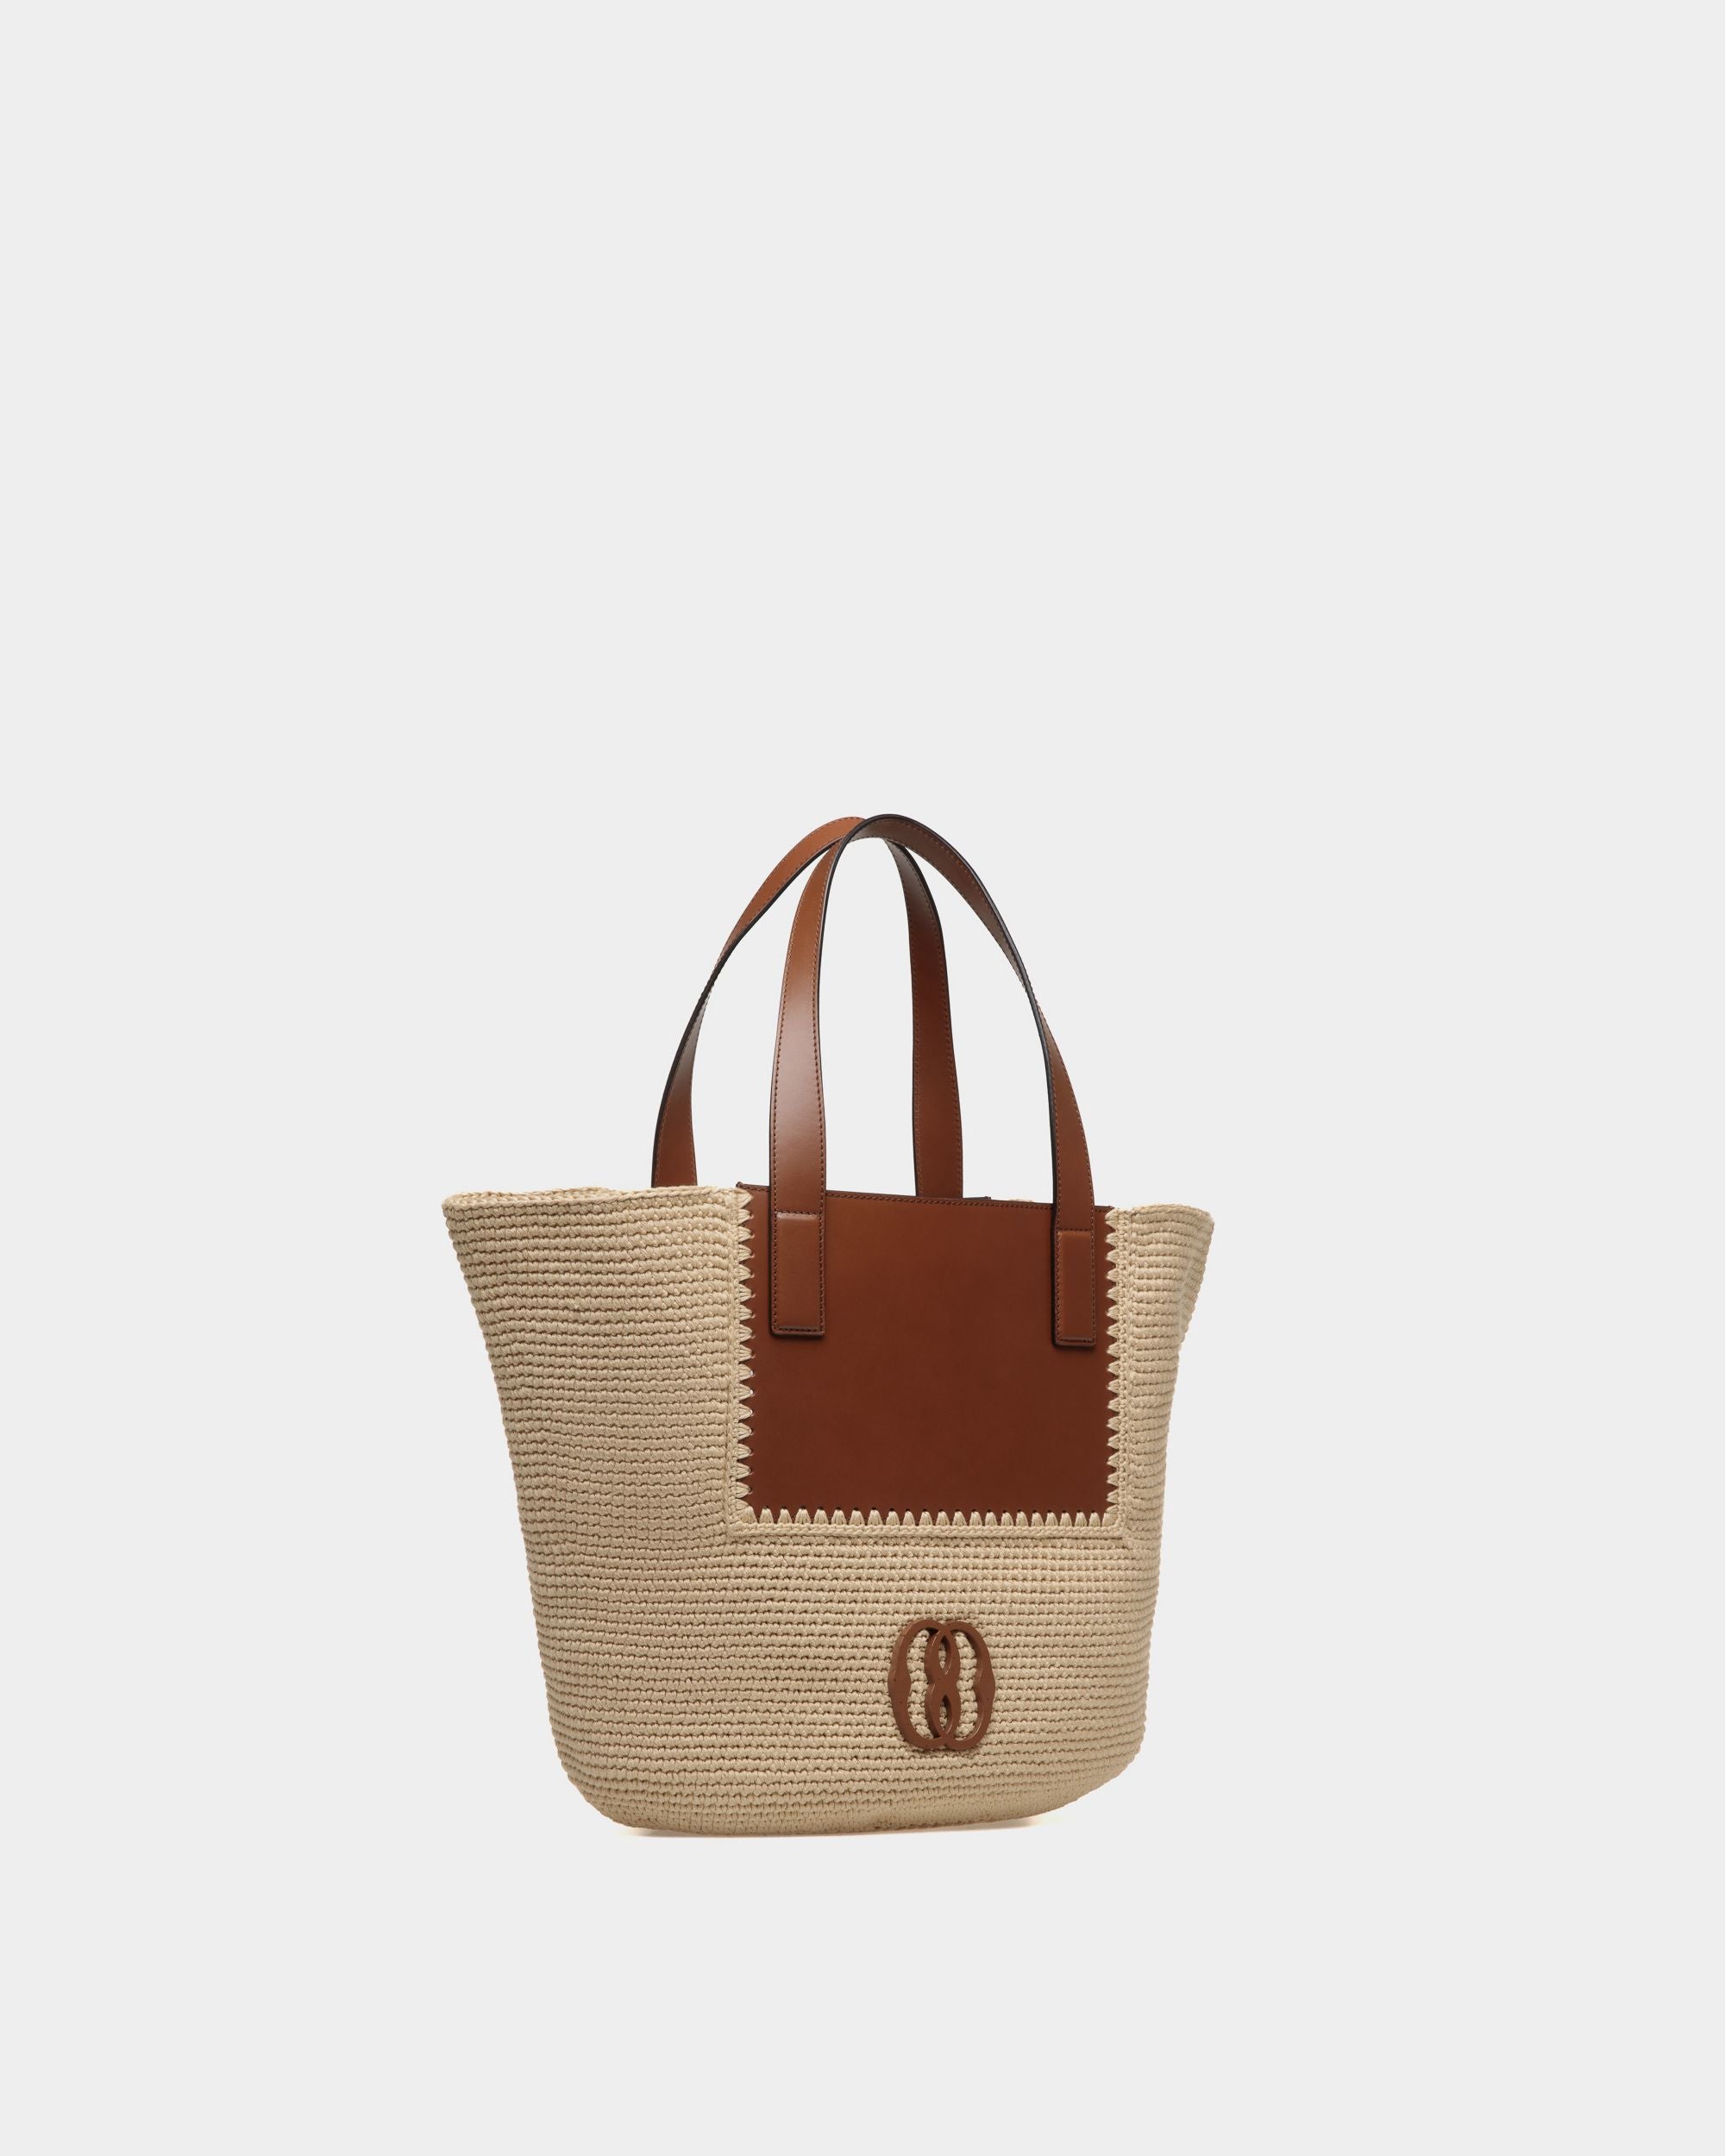 Lace | Women's Tote Bag in Neutral Cotton and Leather | Bally | Still Life 3/4 Front